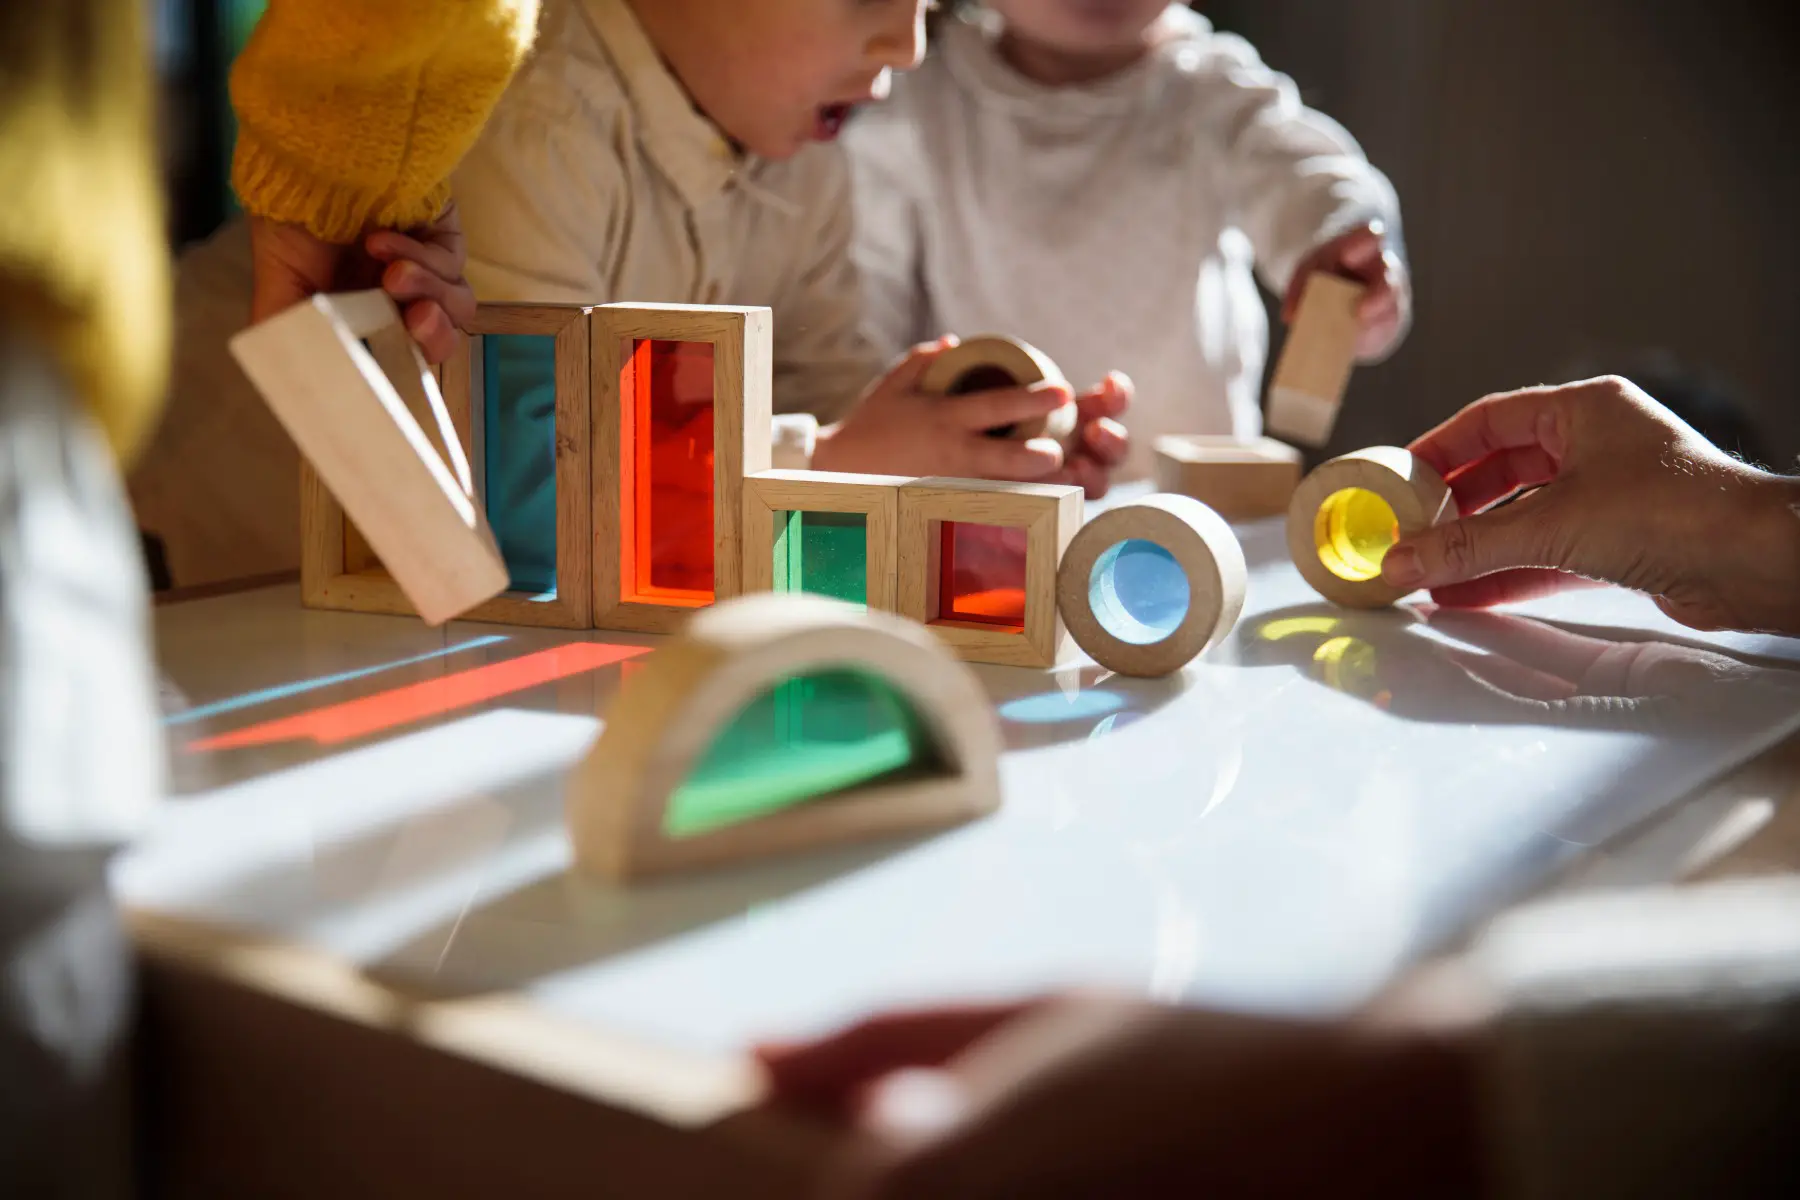 little children playing with colorful wooden building blocks on a table